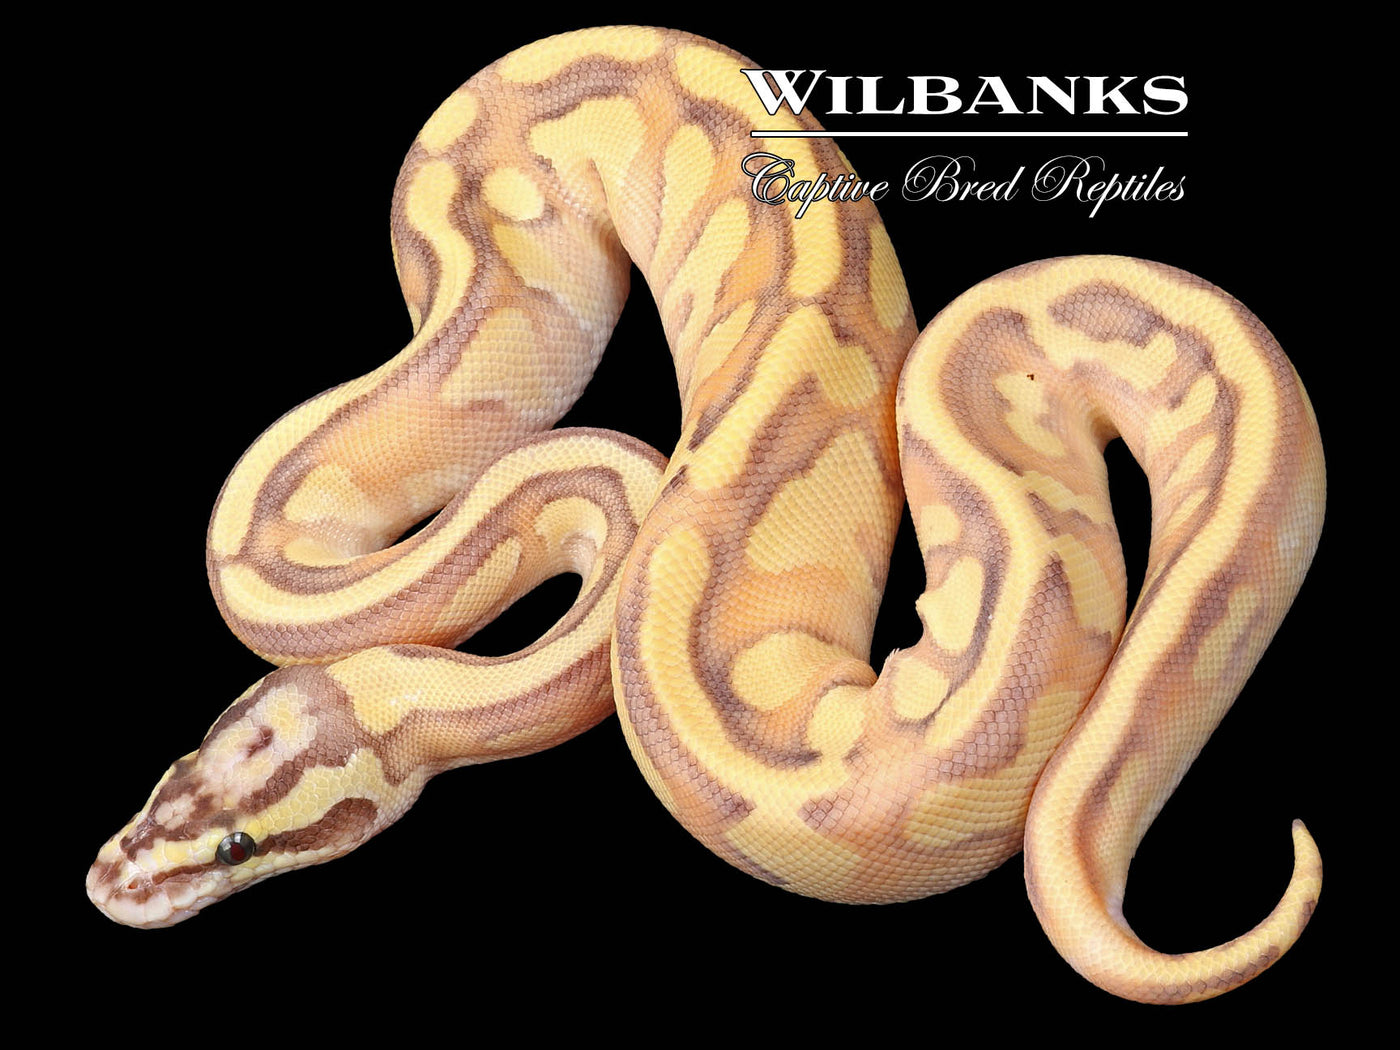 ButterFly Yellow Belly Enchi Ball Python ♀ '23